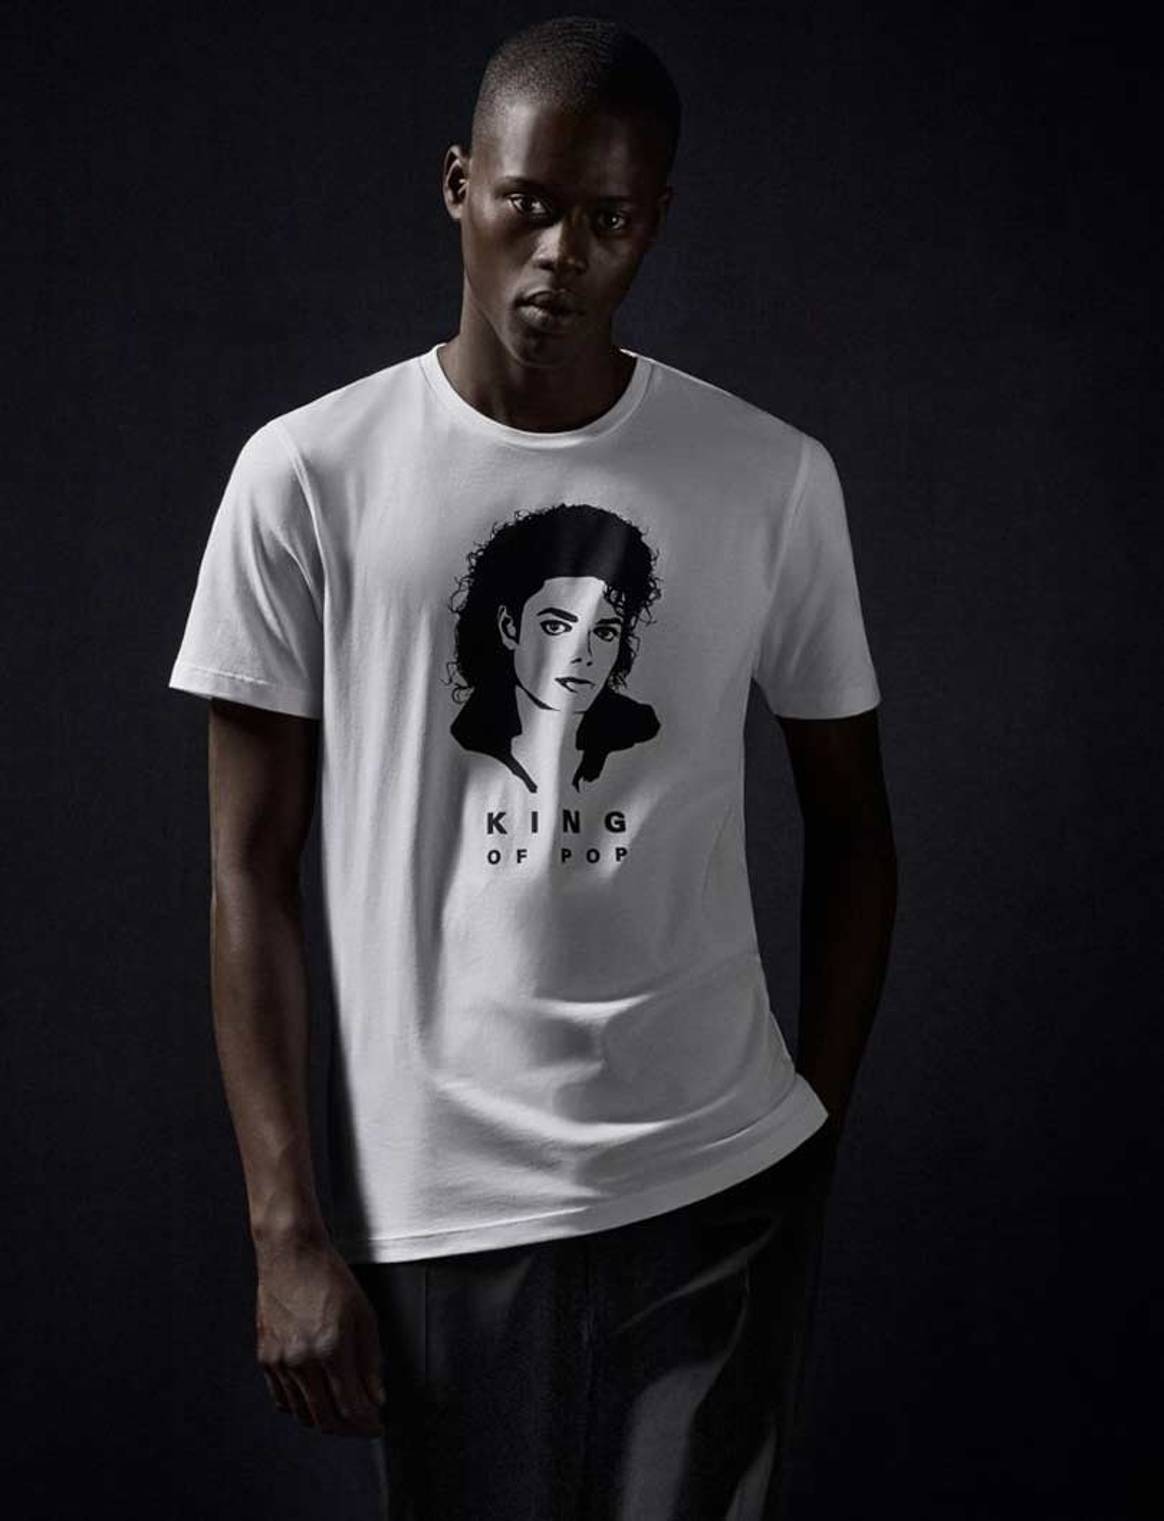 In pictures: Hugo Boss launches collection in honor of Michael Jackson